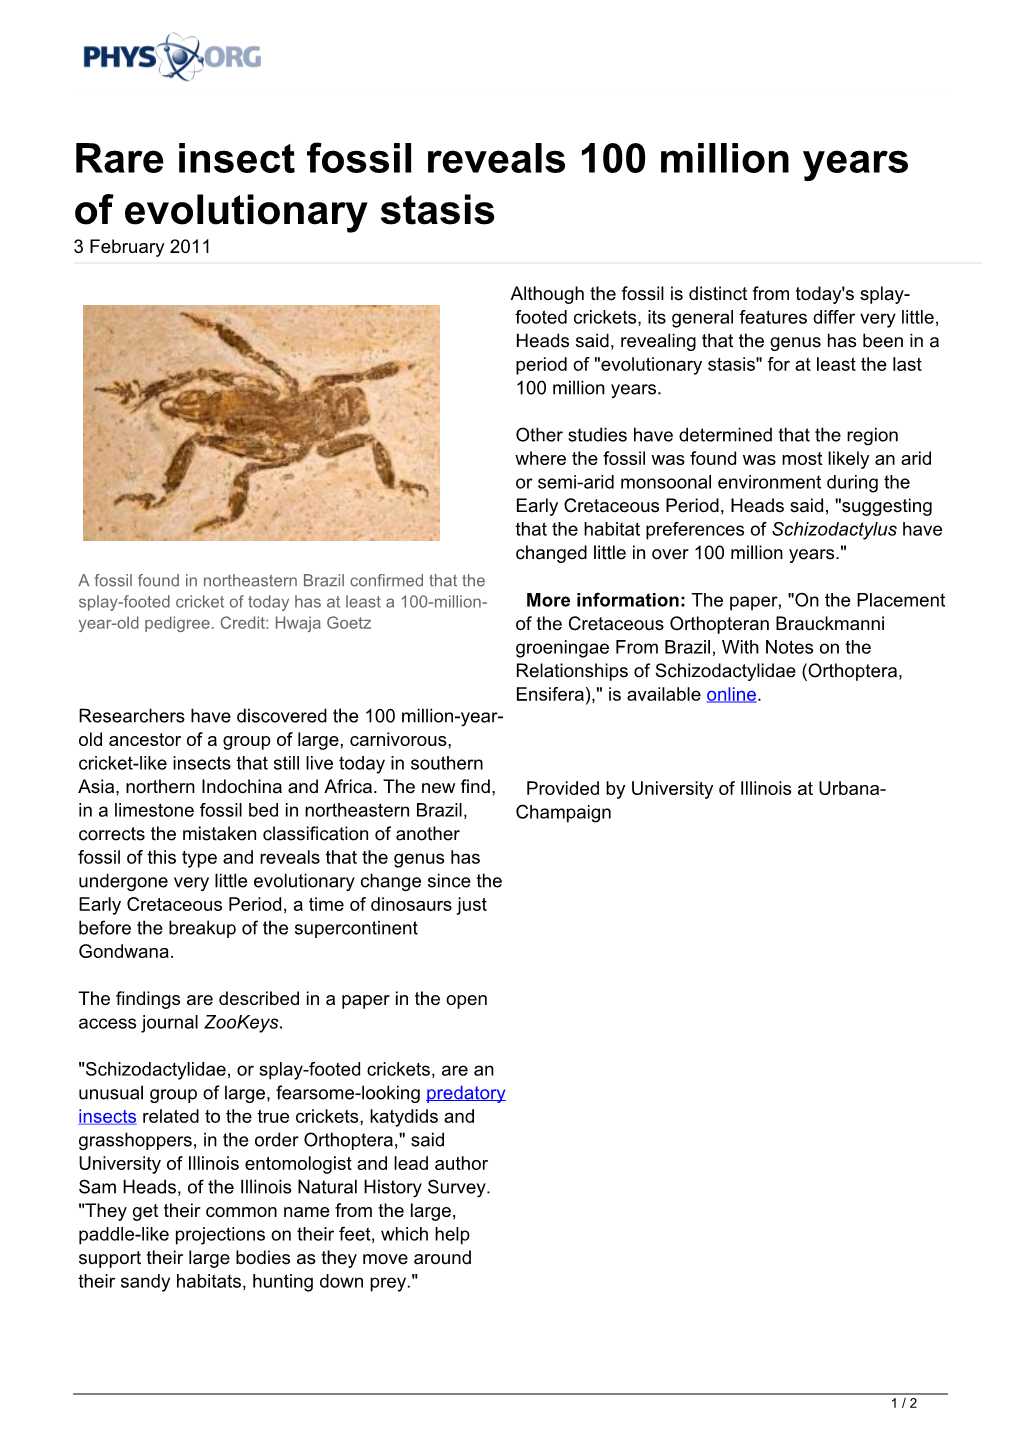 Rare Insect Fossil Reveals 100 Million Years of Evolutionary Stasis 3 February 2011